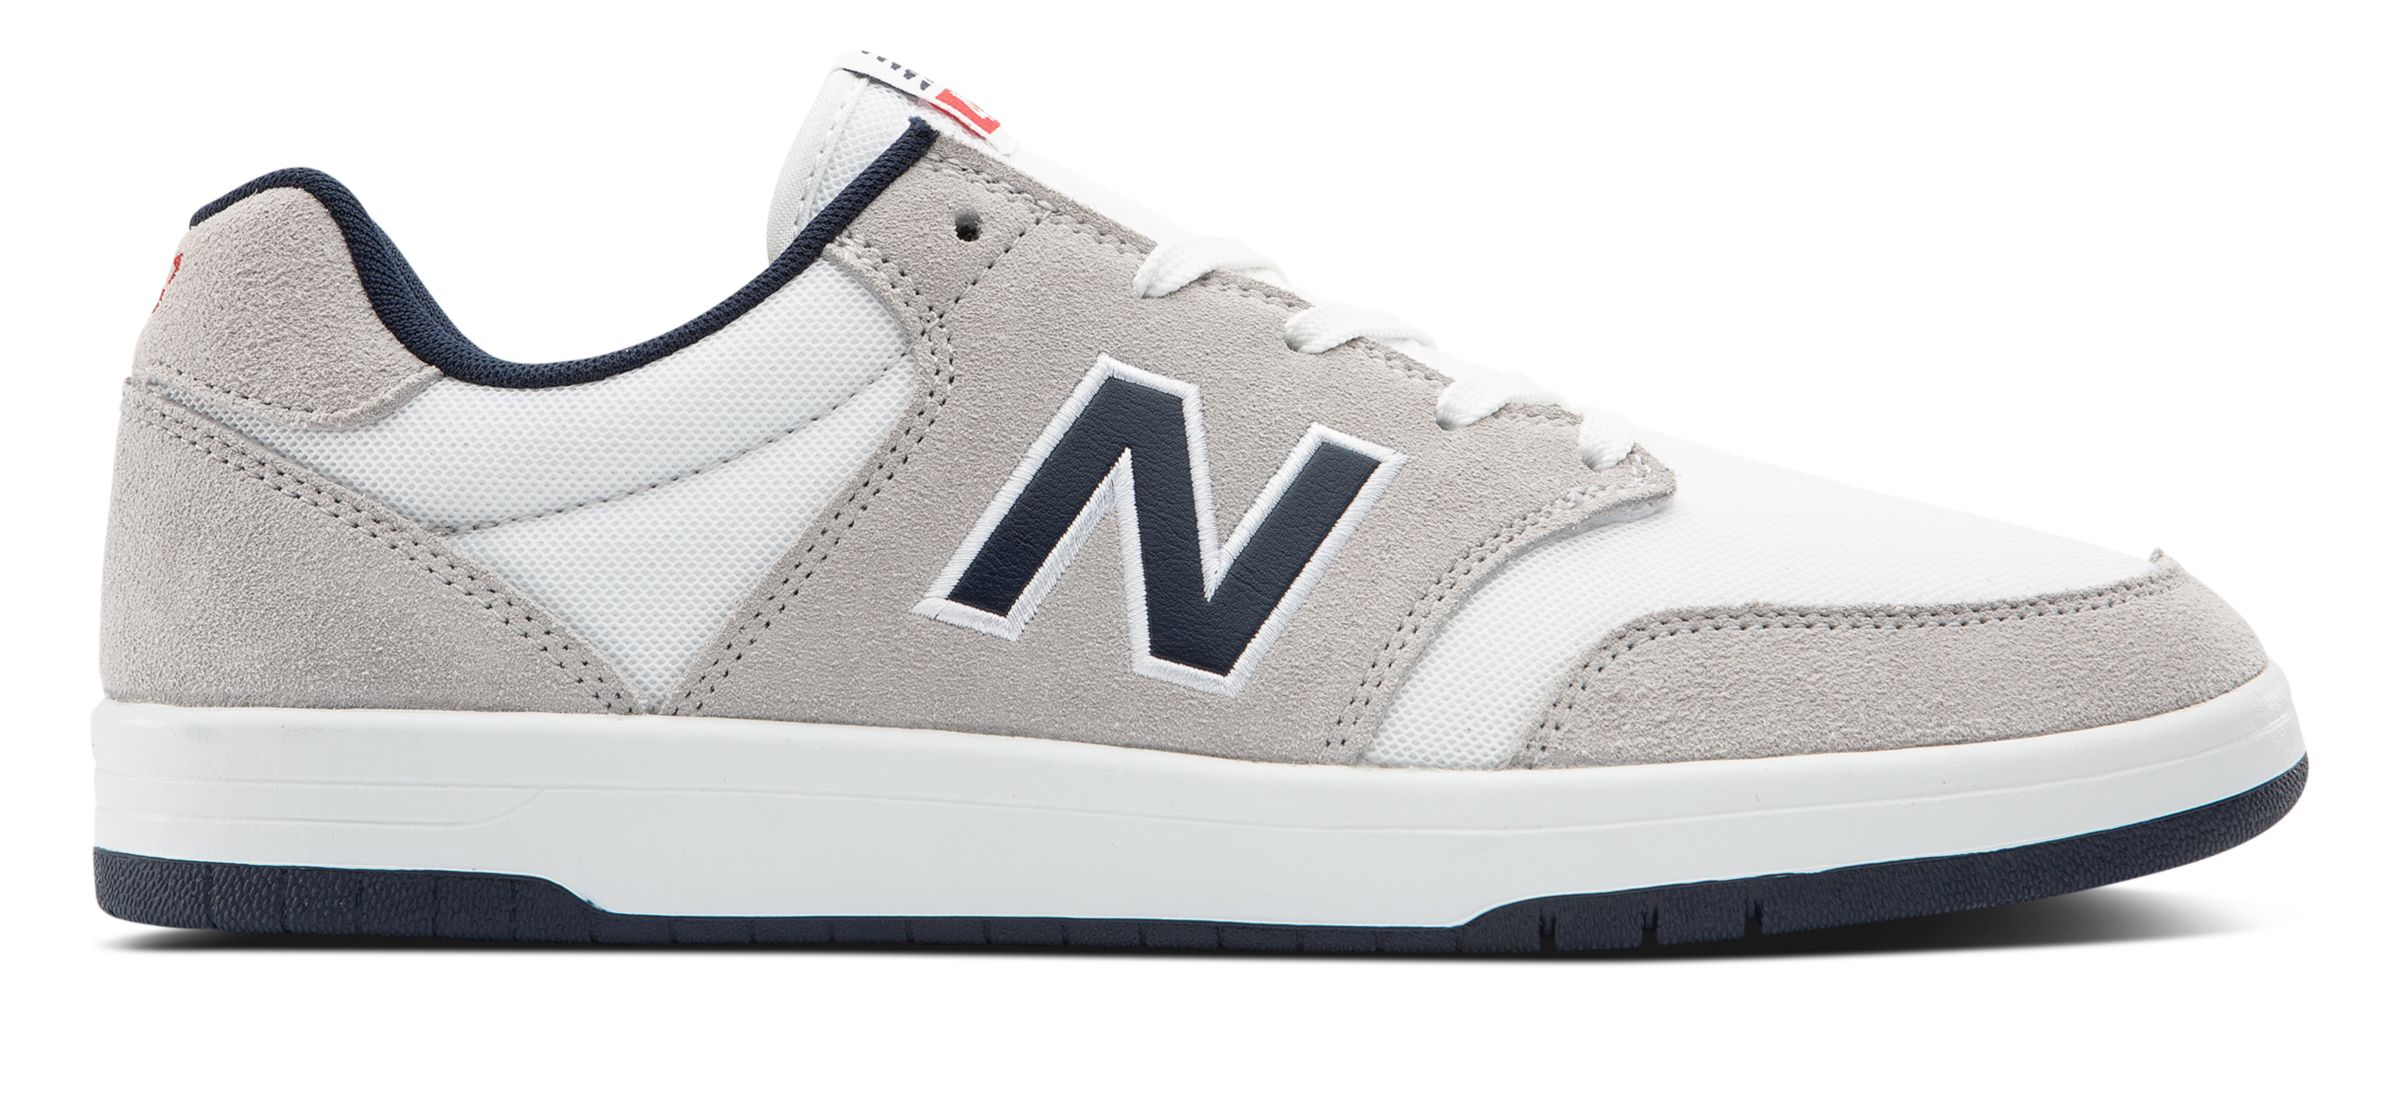 new balance 520 review